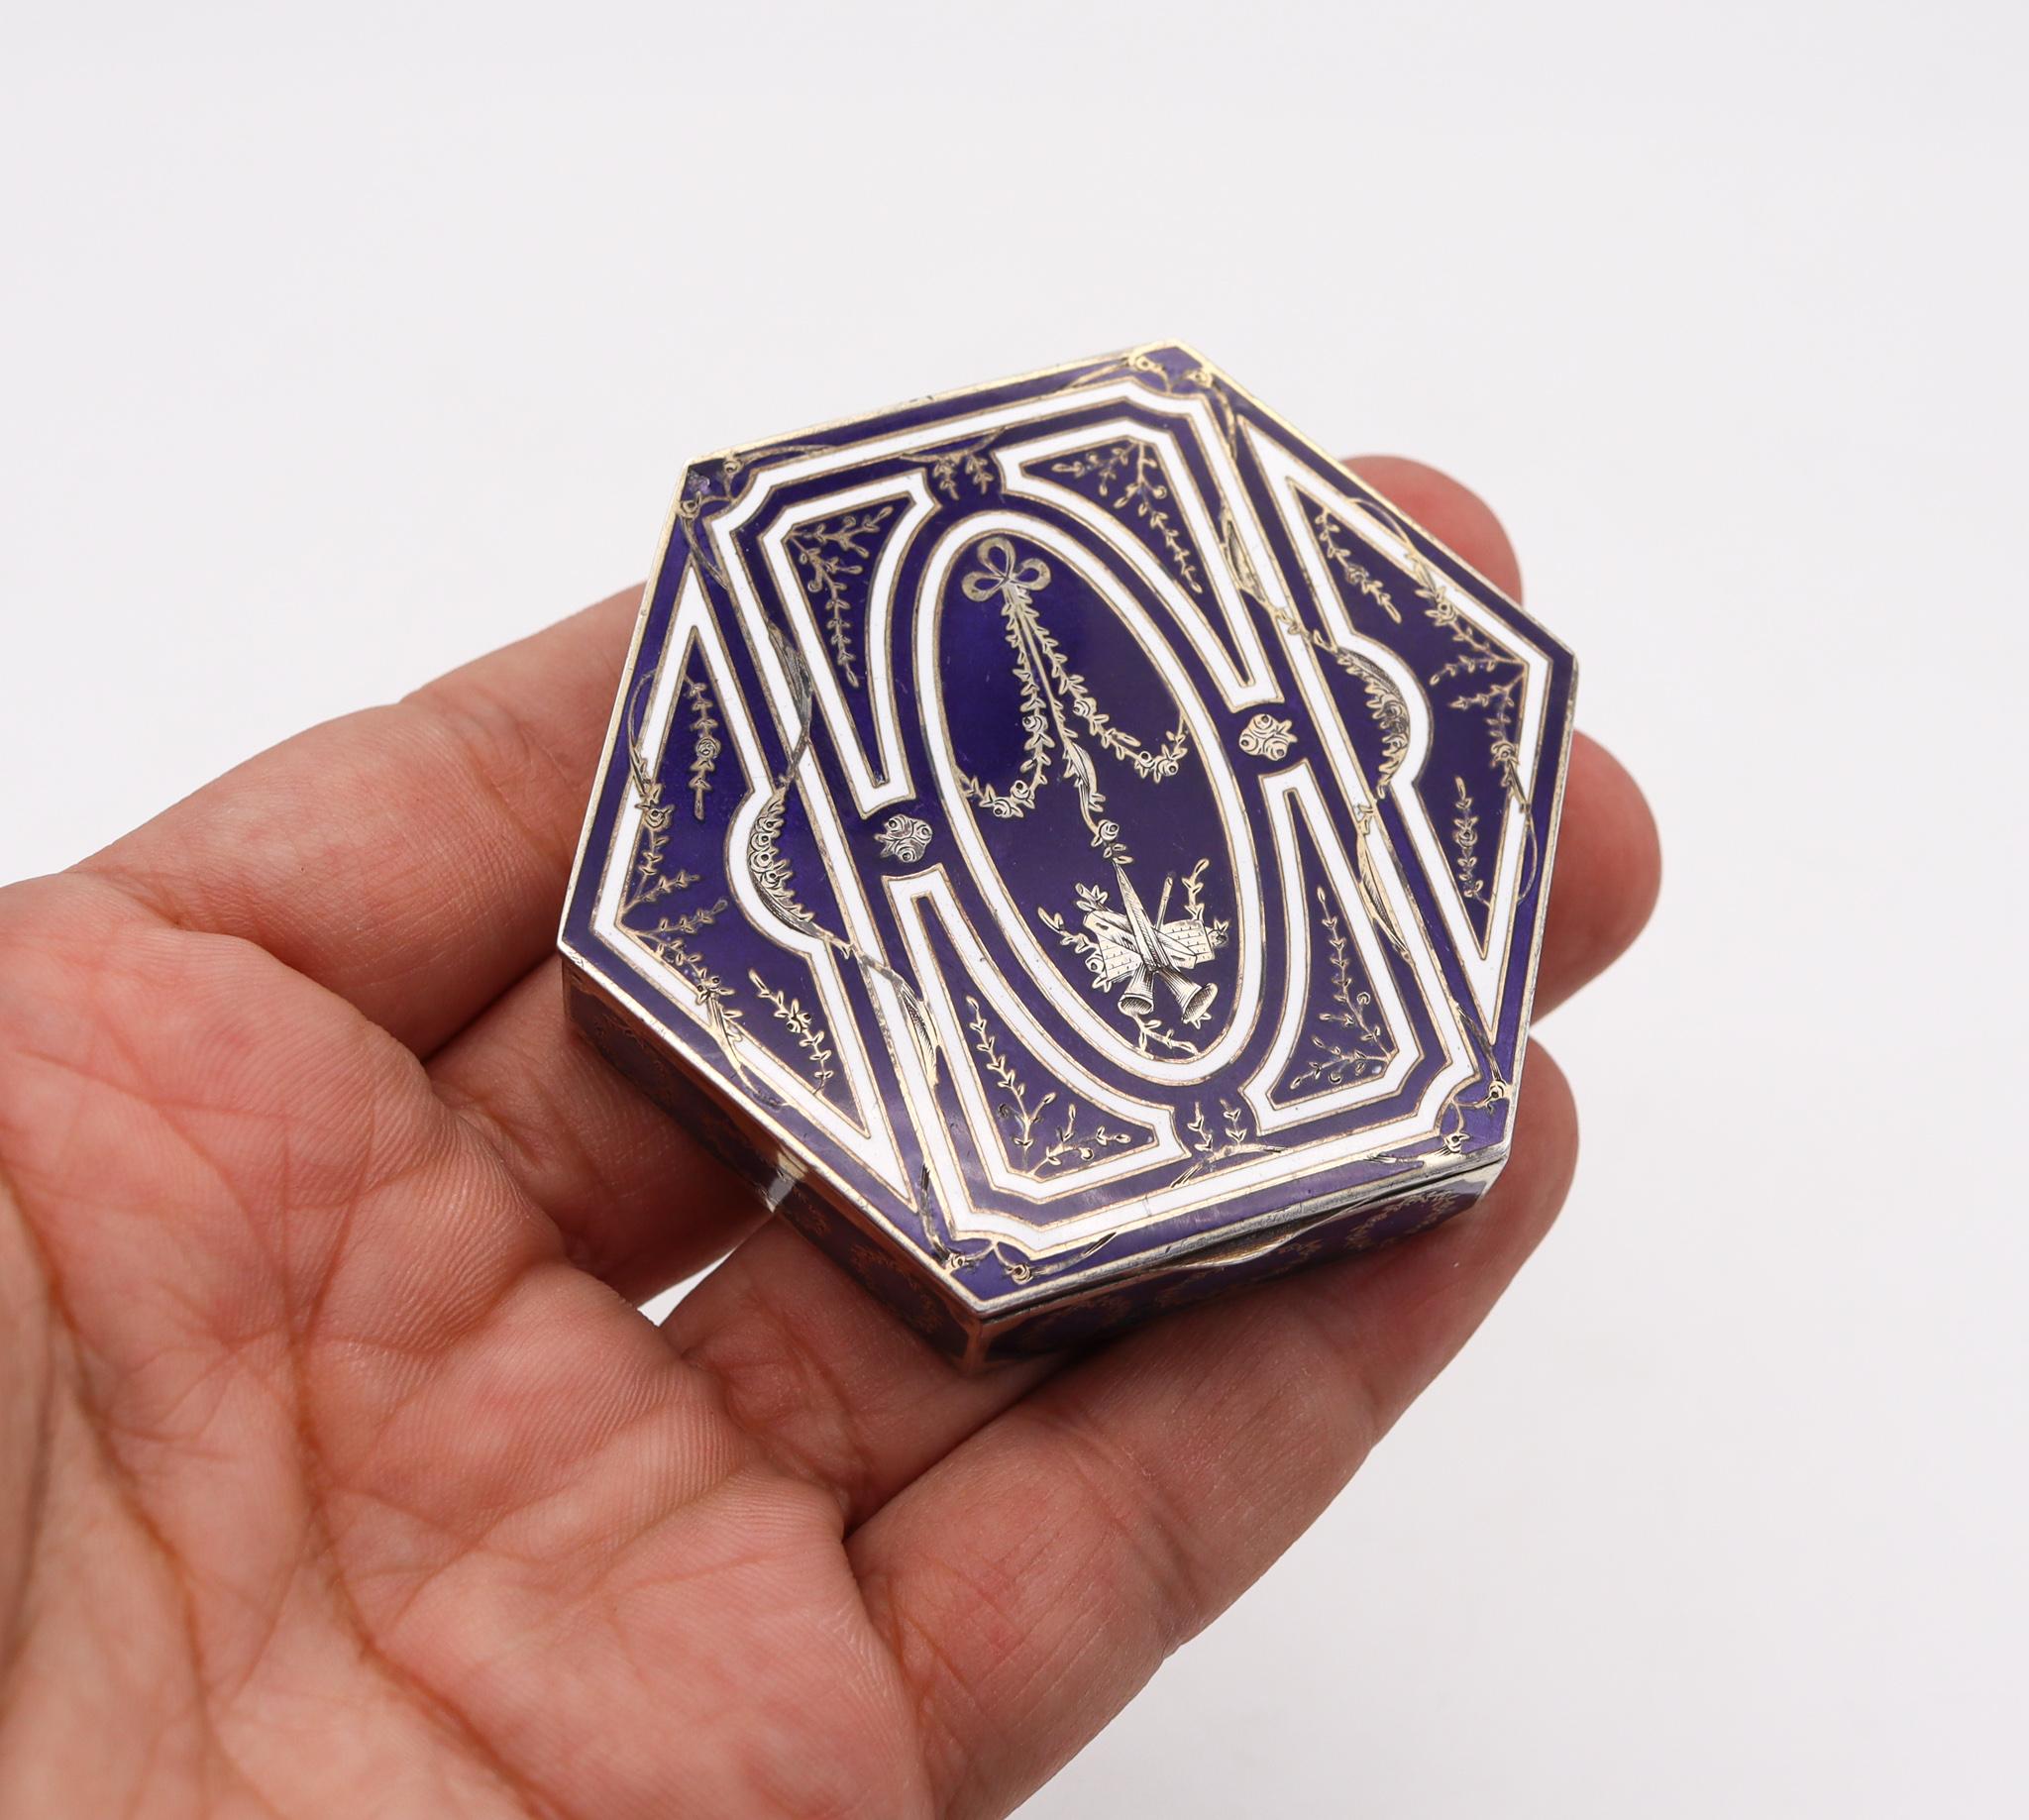 French 1905 Edwardian Hexagonal Snuff Box Sterling Silver with Guilloche Enamel In Good Condition For Sale In Miami, FL